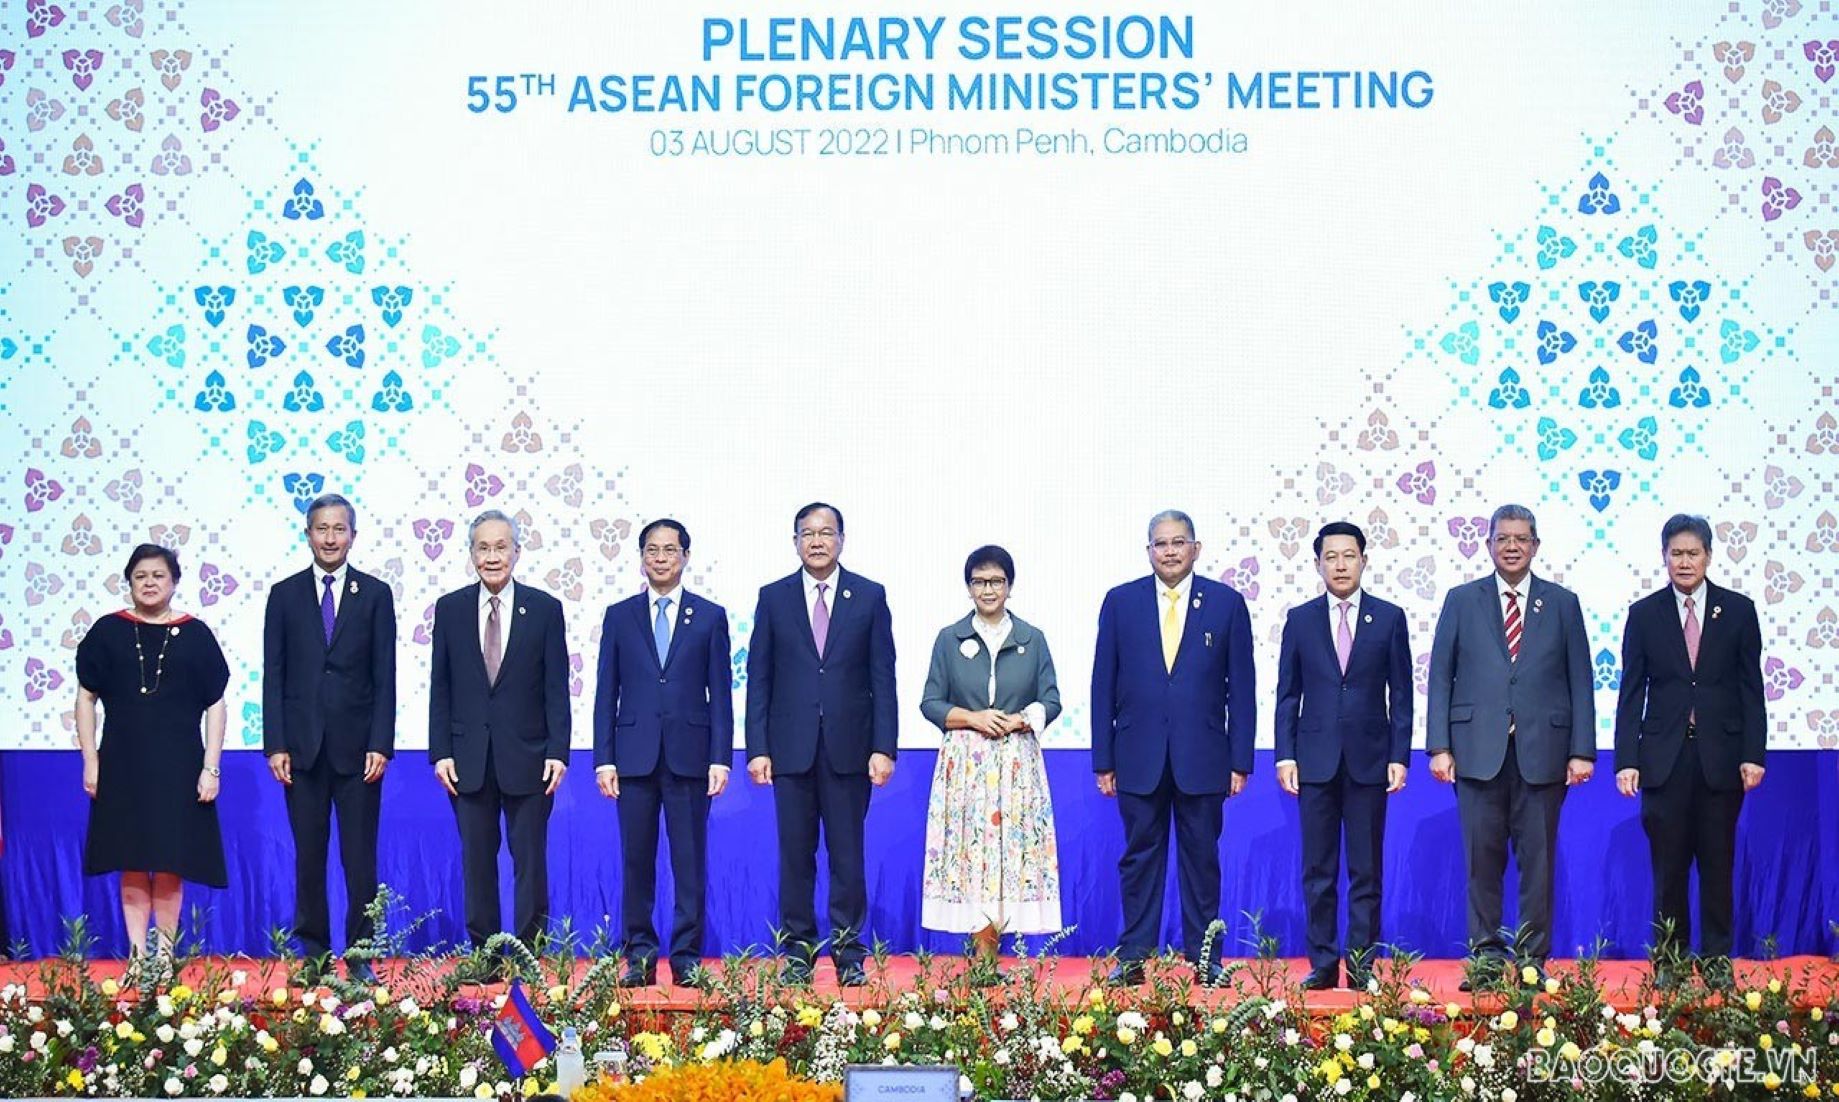 55th ASEAN FMs’ Meeting, Related Meetings Ended With Adoption Of Some 30 Documents: Cambodian FM